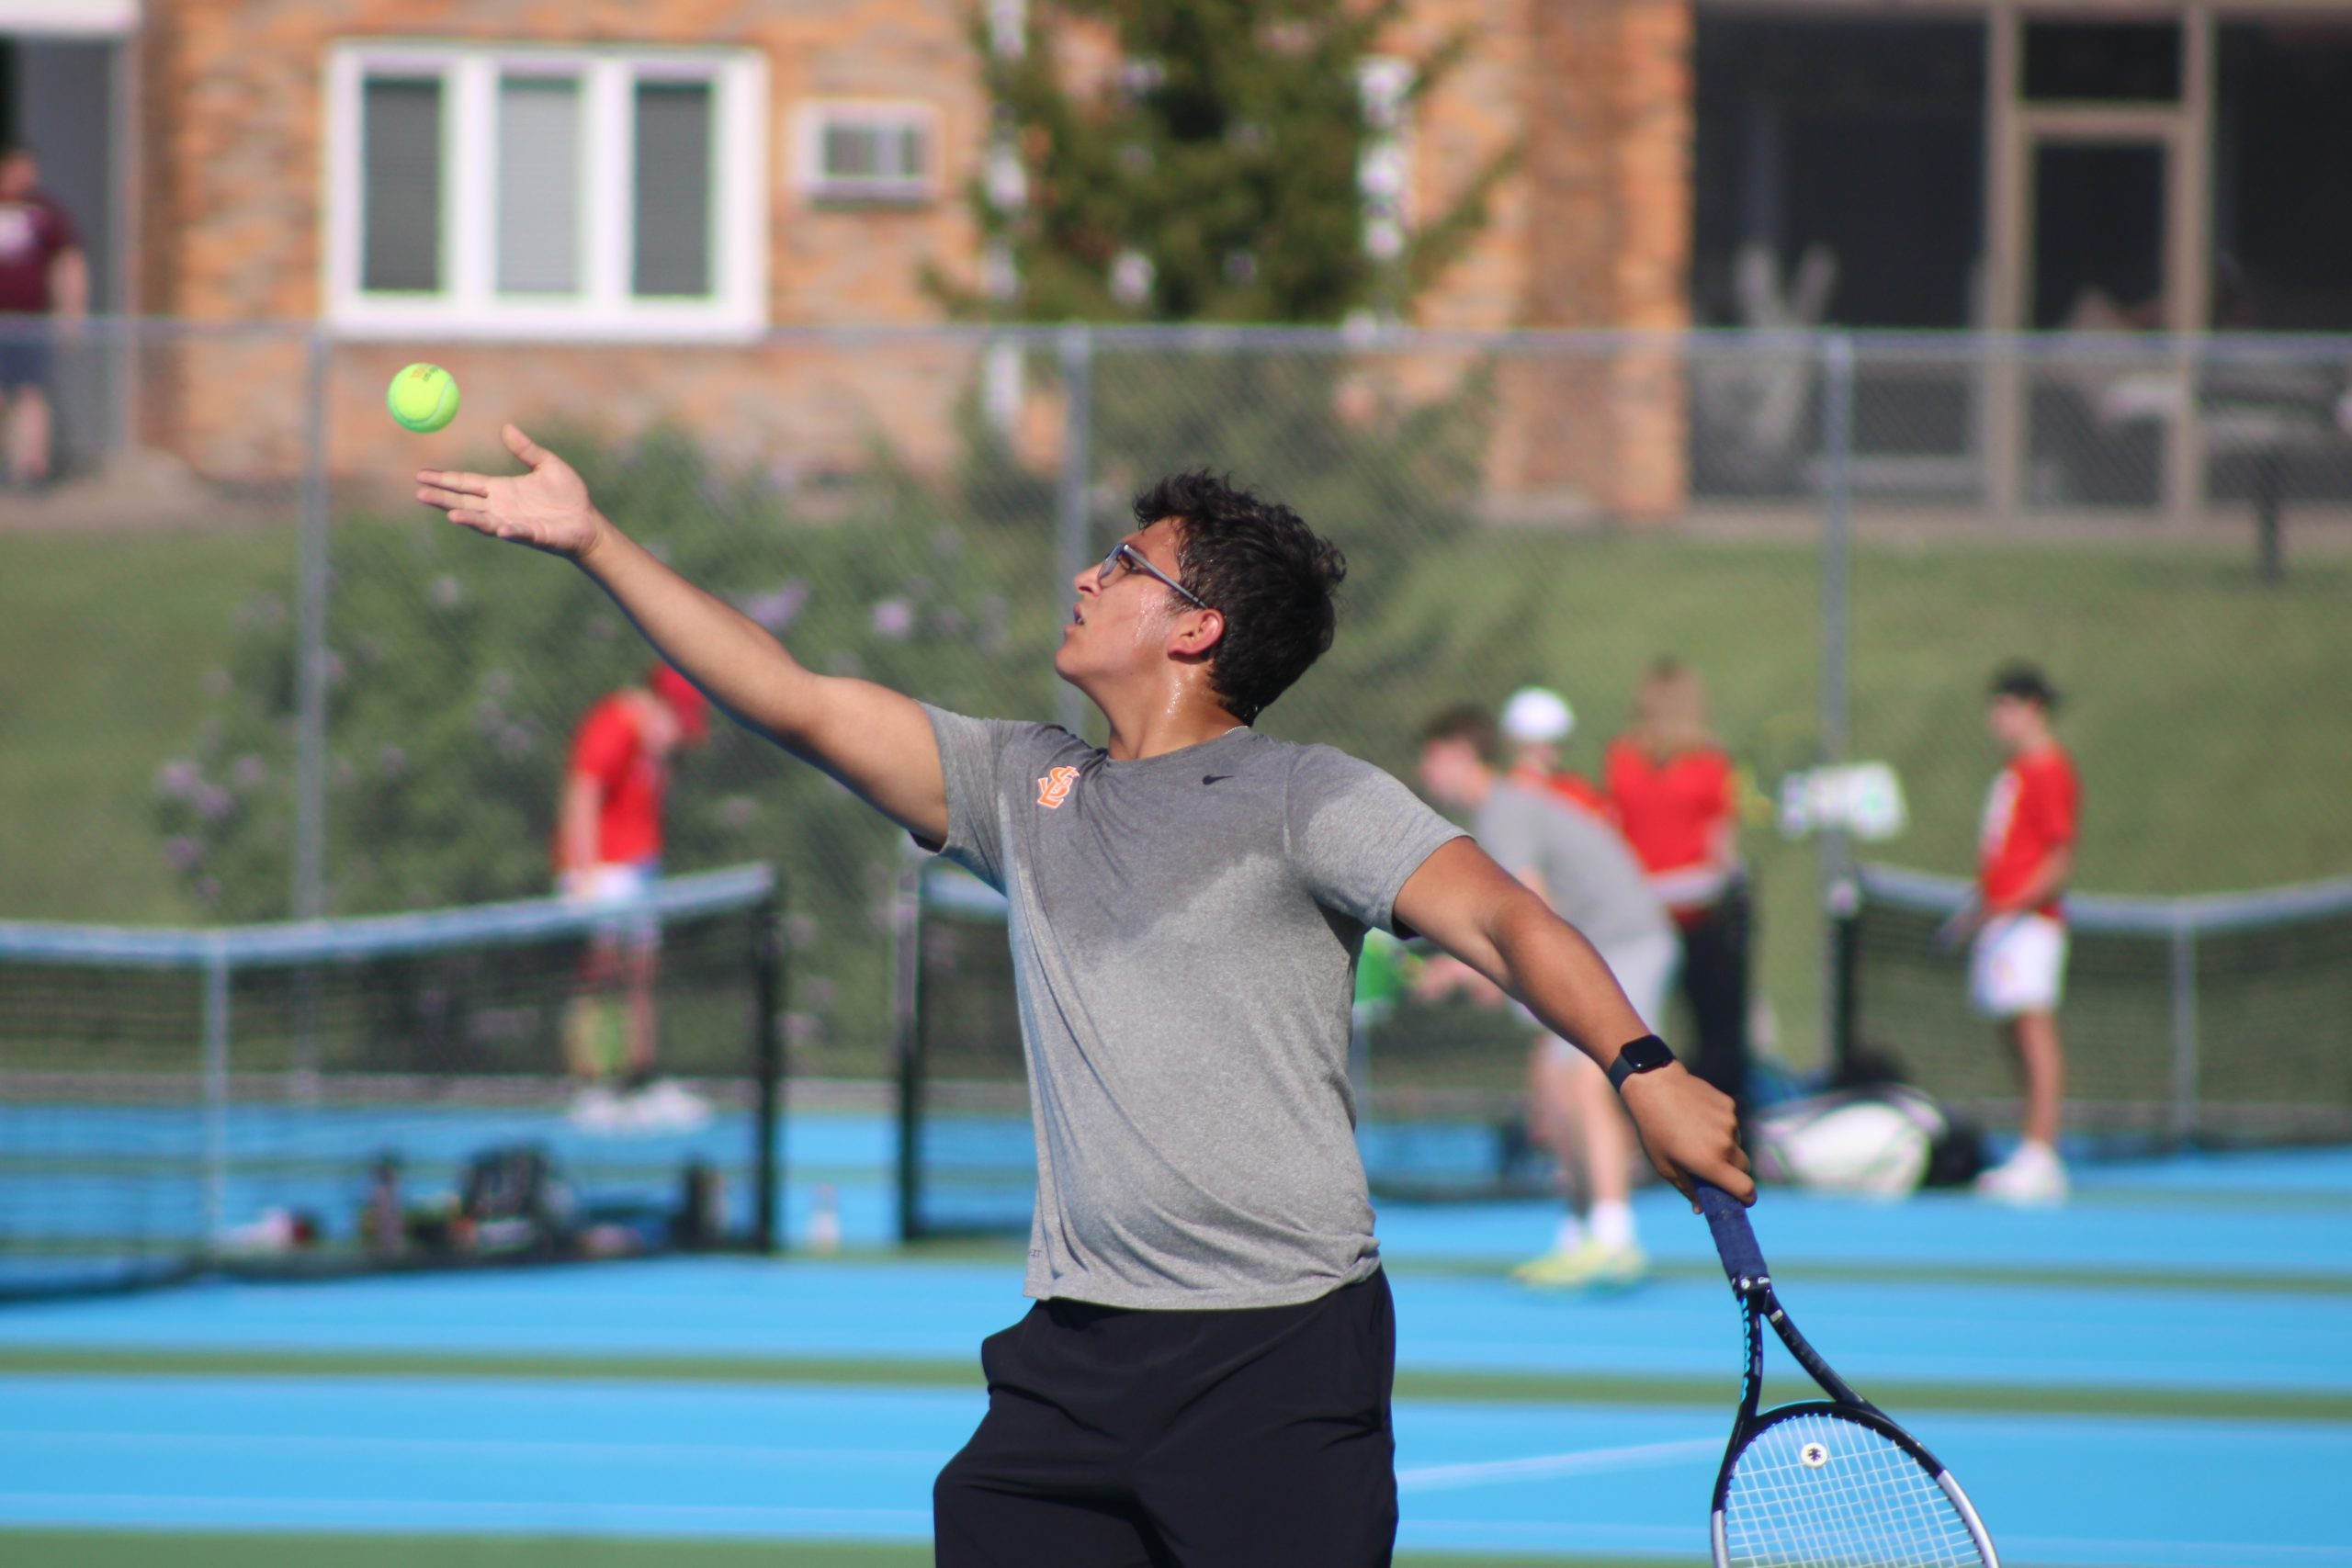 Junior Josh Fink prepares to serve the ball May 14. Fink ended up losing his match against Benilde St. Margaret’s at sections.